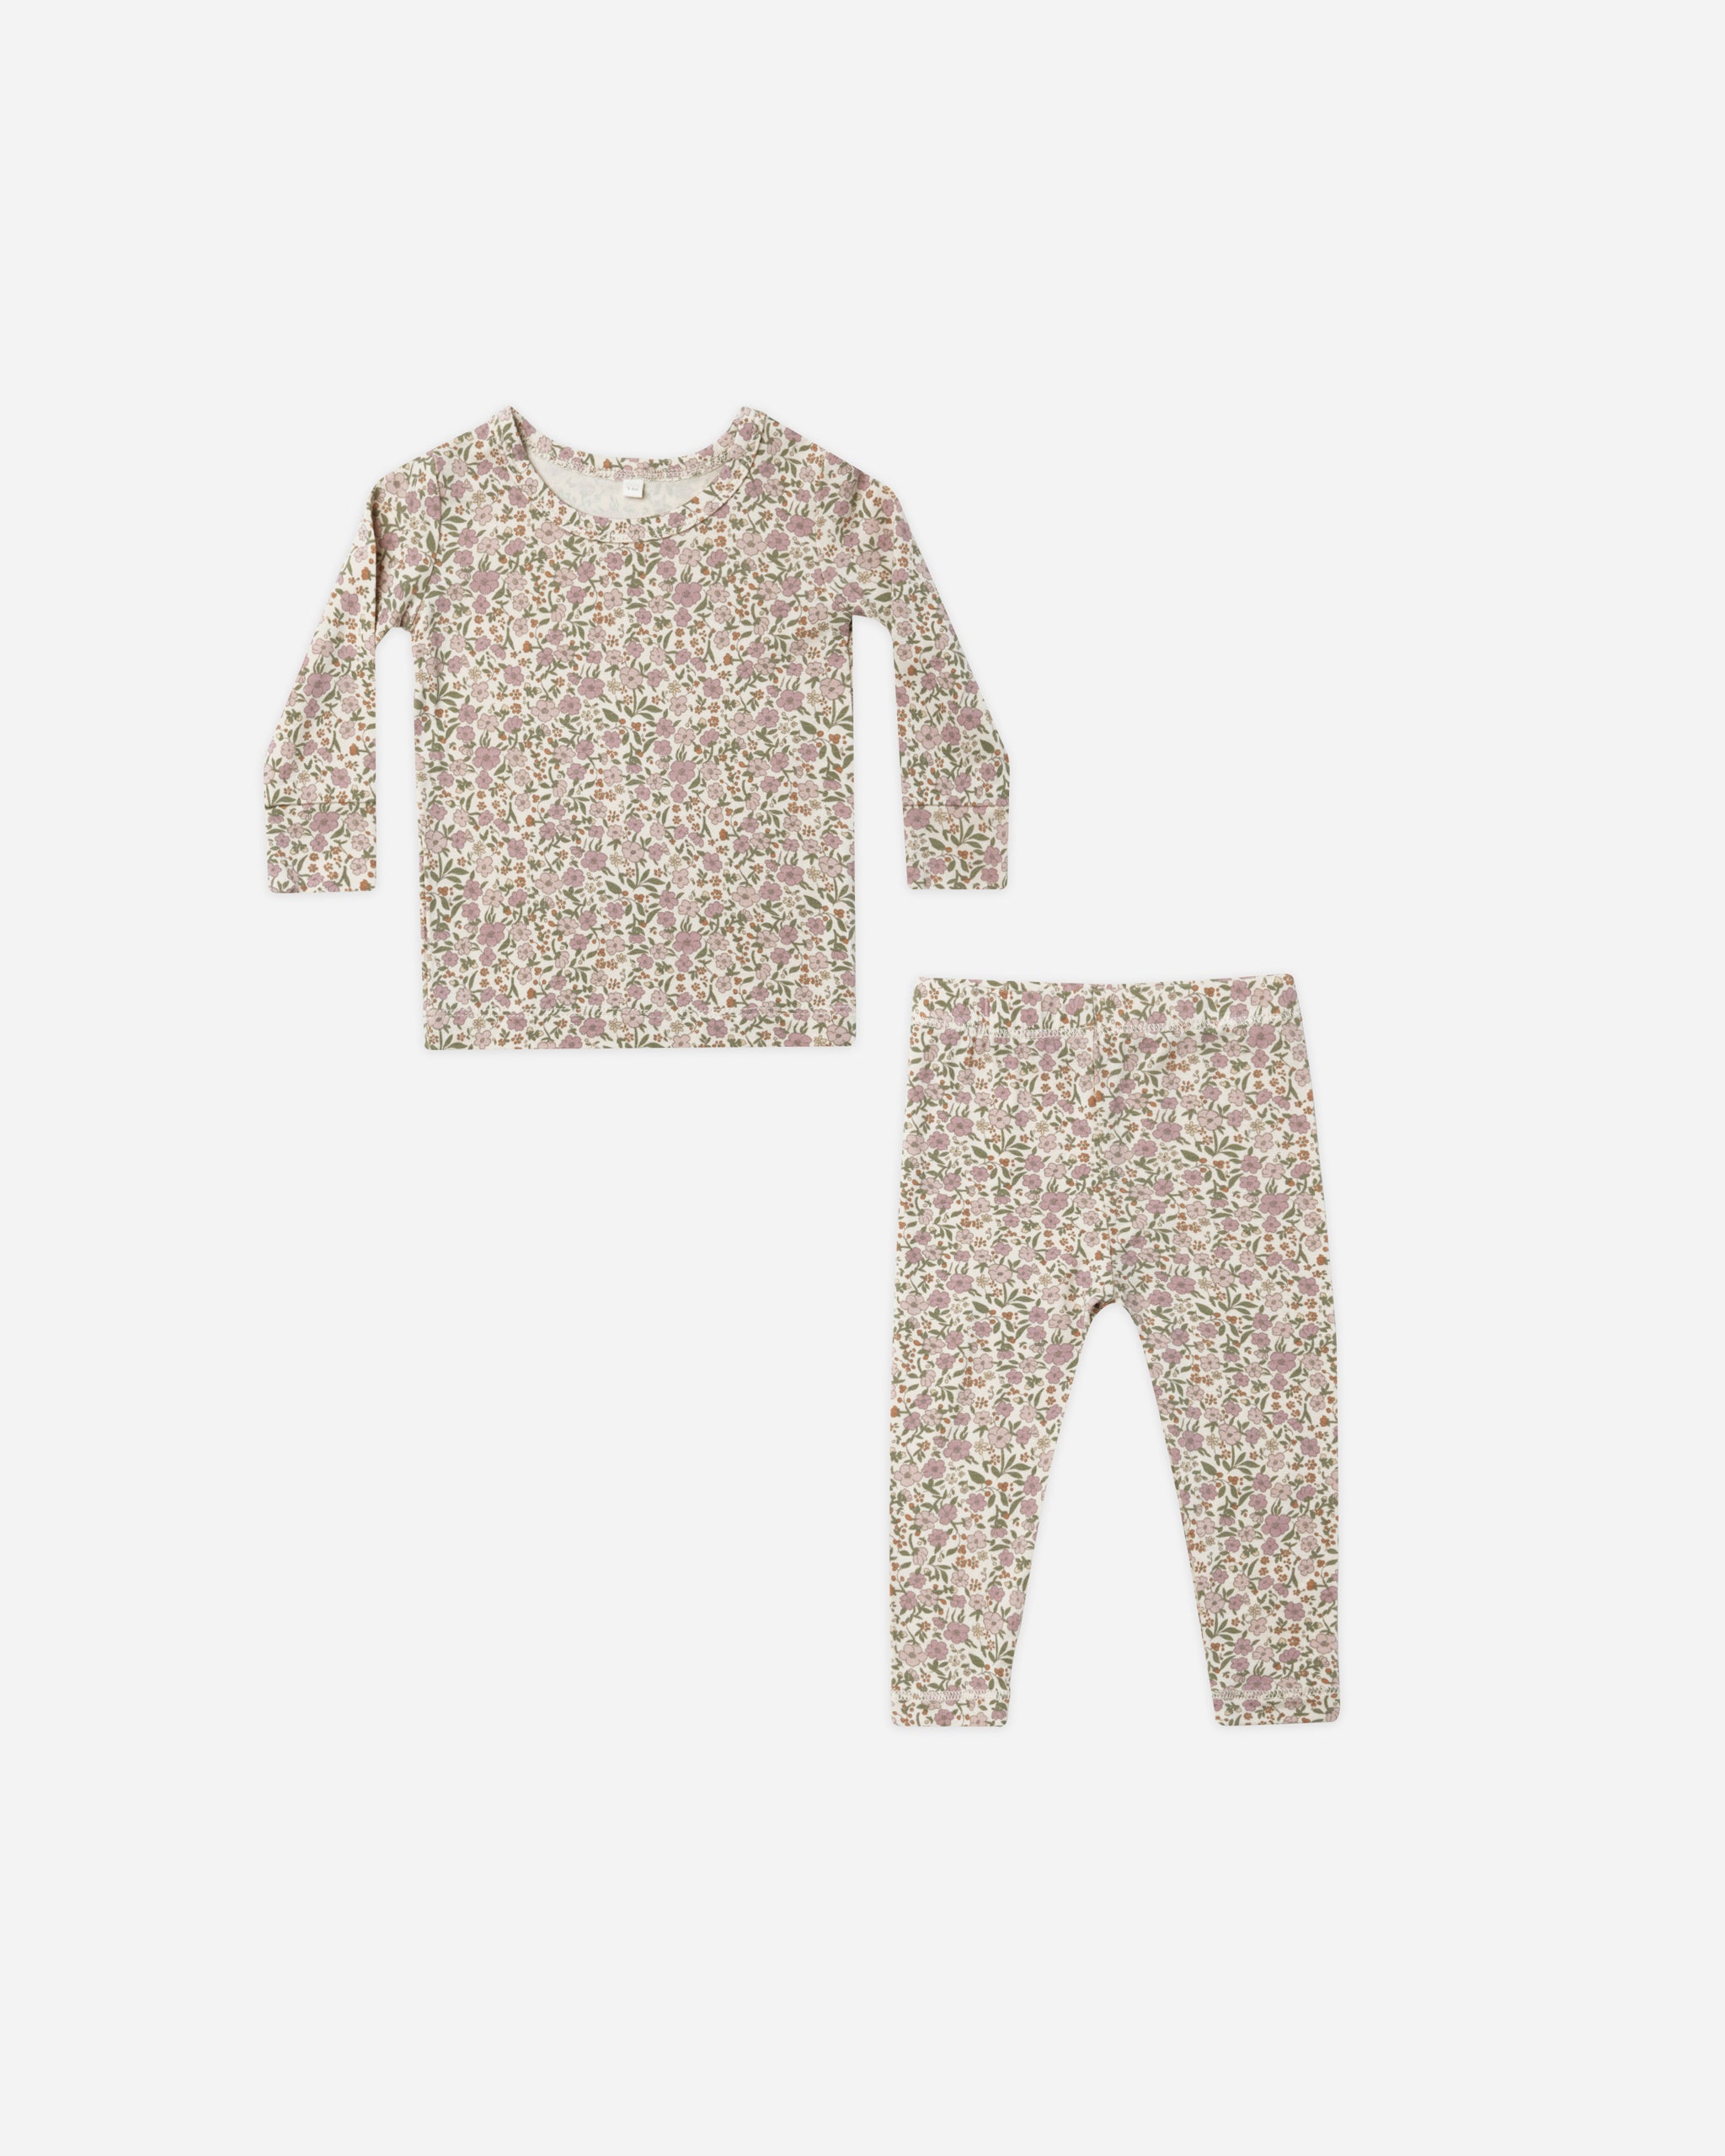 Bamboo Pajama Set || Flower Field - Rylee + Cru | Kids Clothes | Trendy Baby Clothes | Modern Infant Outfits |